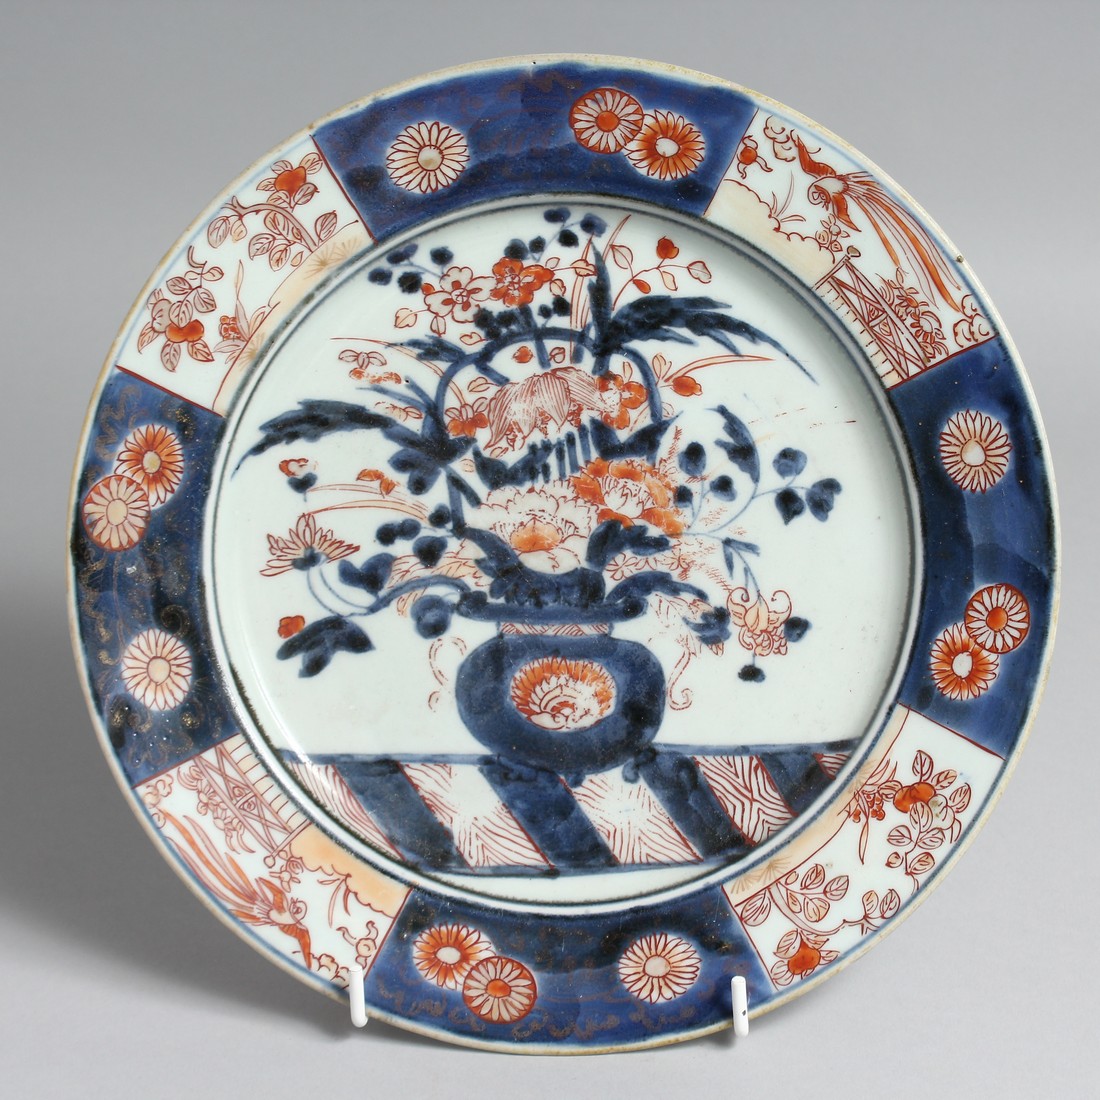 A JAPANESE IMARI PORCELAIN DISH, decorated with central jardiniere of flowers. 24cm diameter